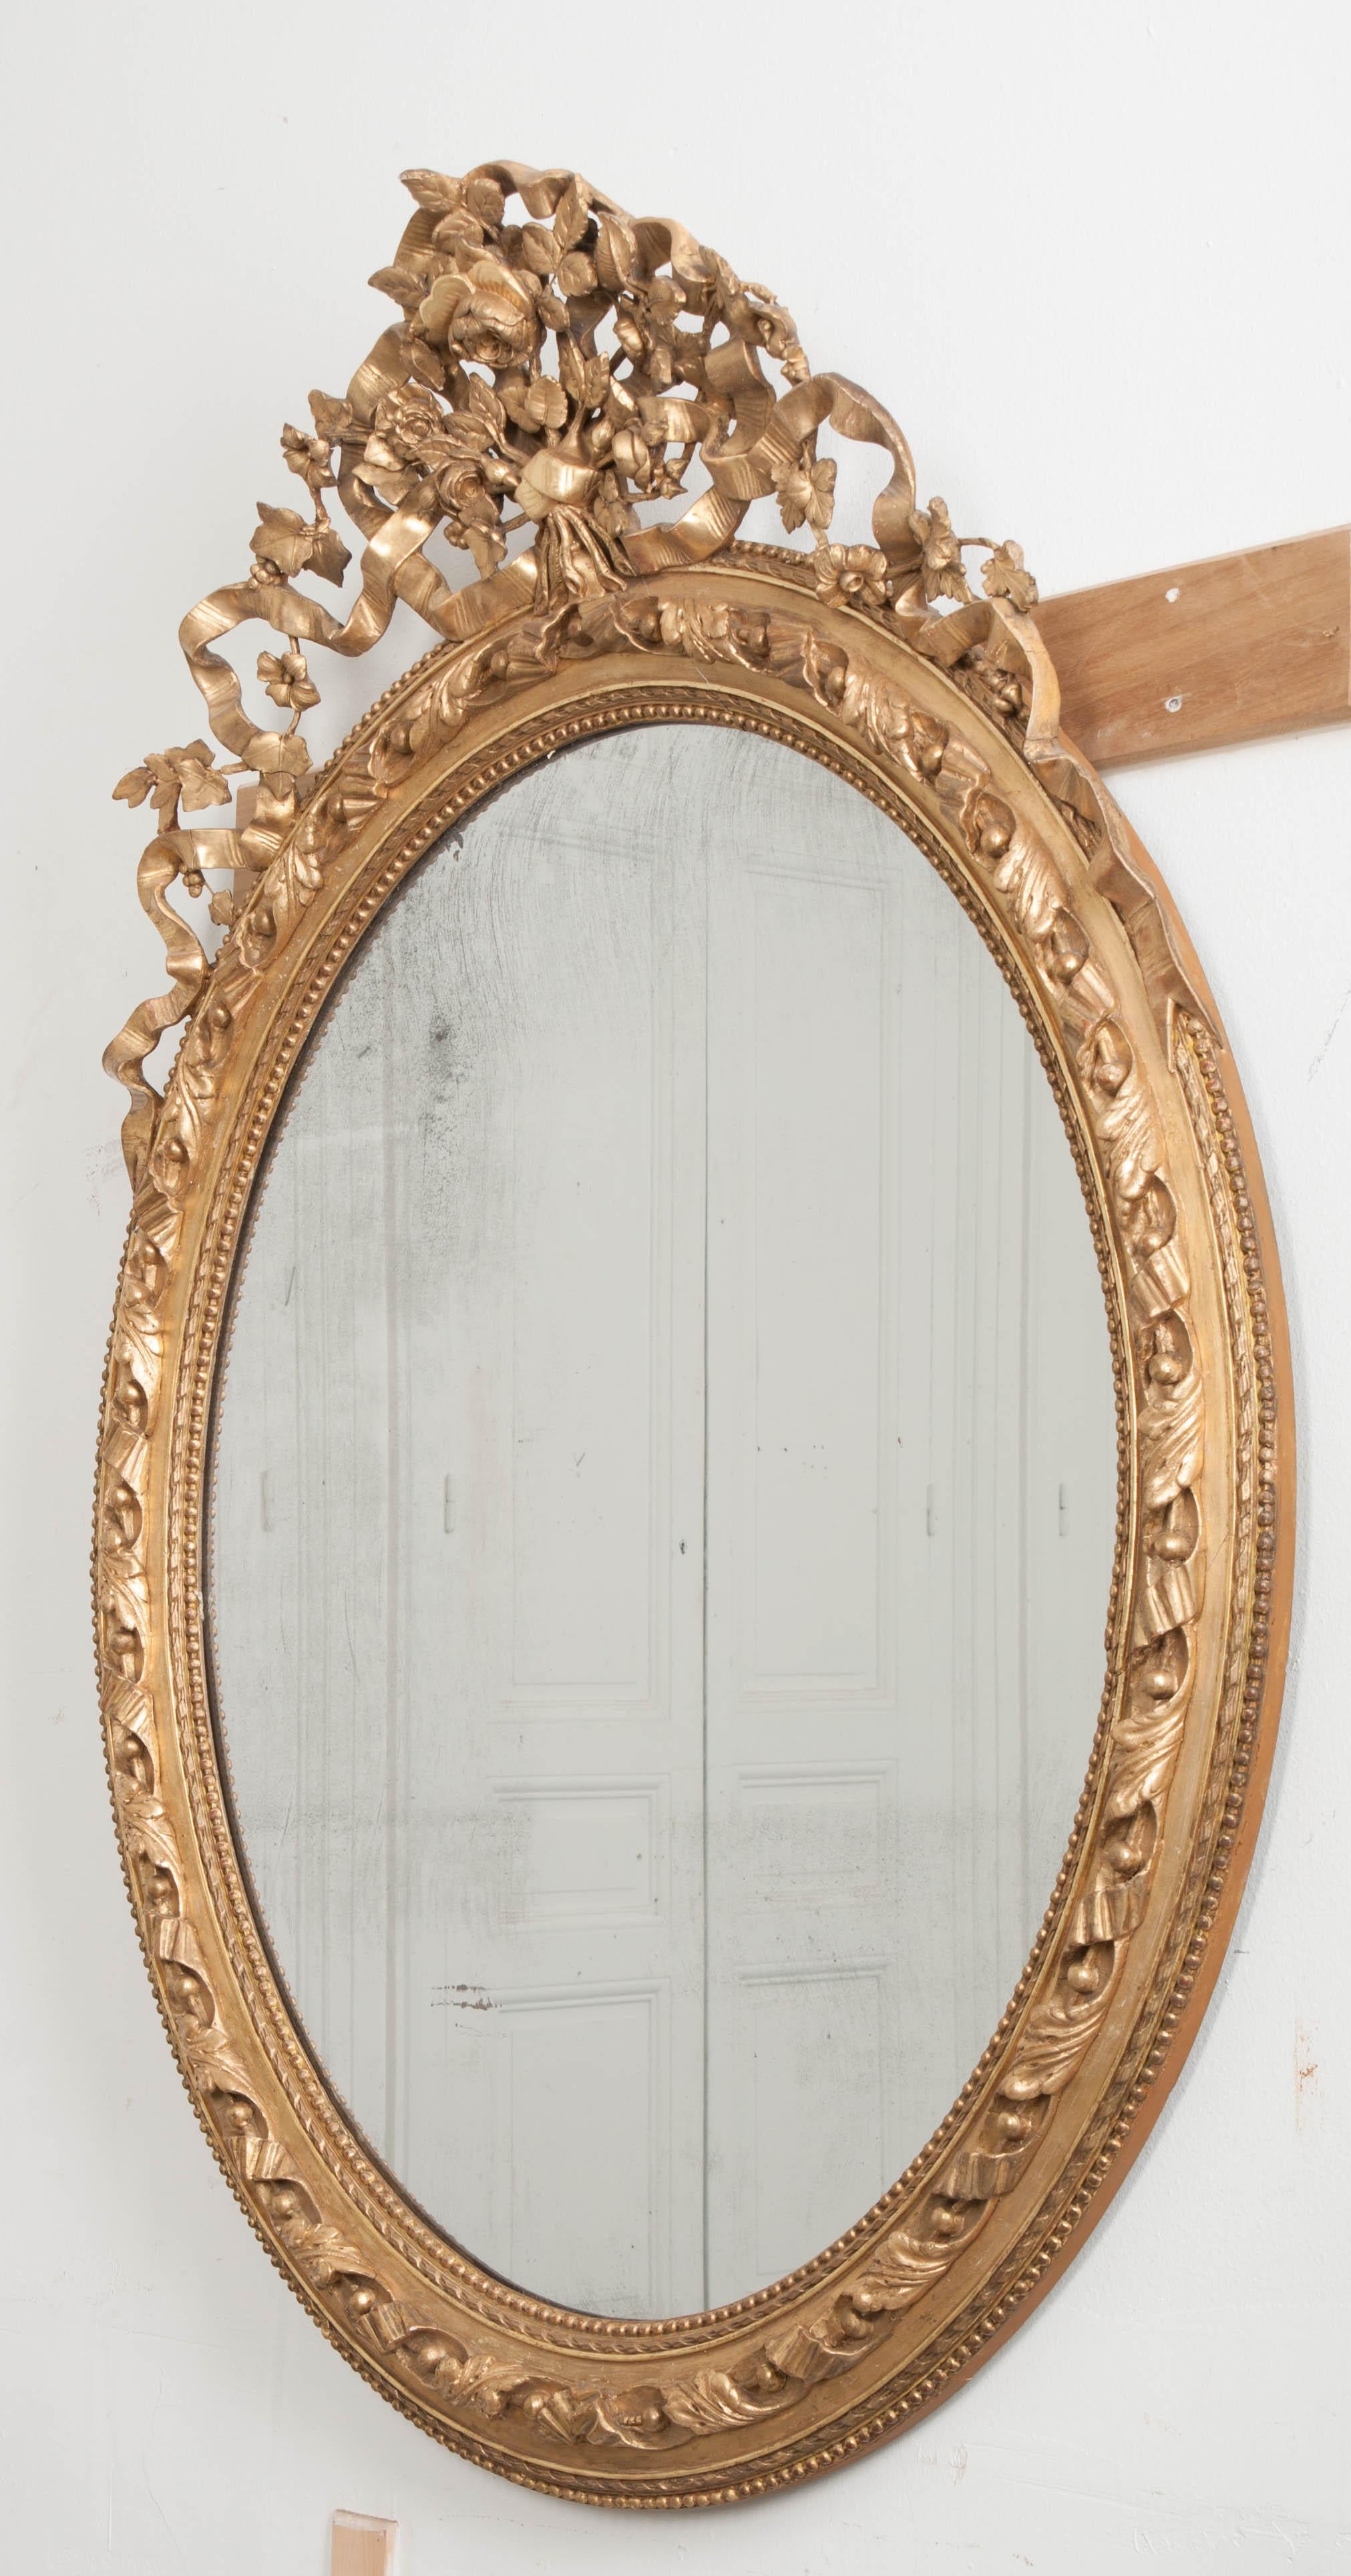 Fanciful and fun, this 19th century French Louis XVI- style oval gold gilt mirror boasts intricate, carved details from top to bottom. A carved bouquet of flowers and vines crowns the brilliant mirror, with exceptional ribbon details. The original